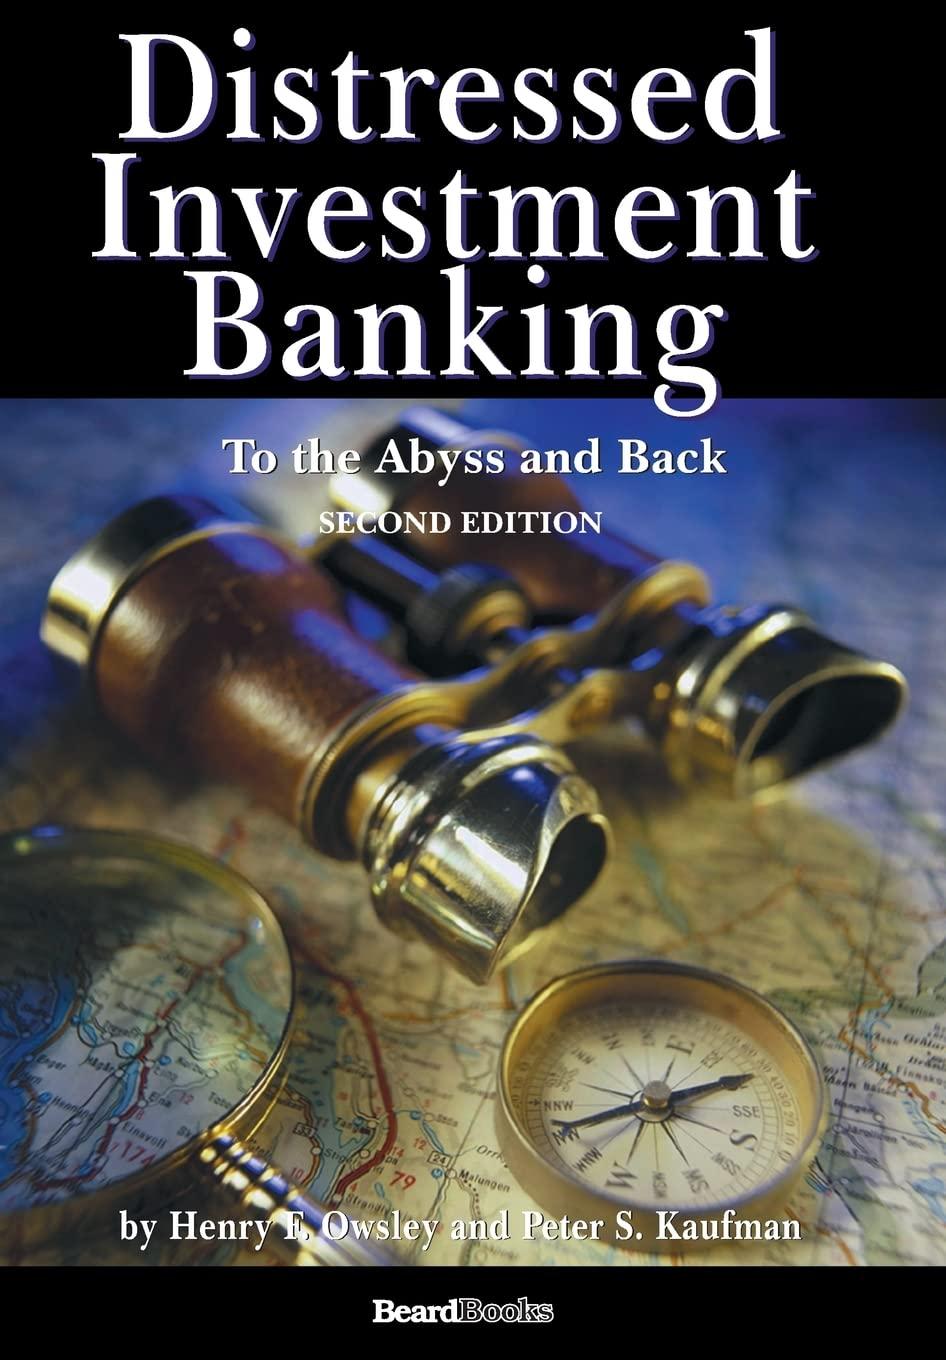 distressed investment banking to the abyss and back 2nd edition peter s kaufman, henry f owsley 1587983044,